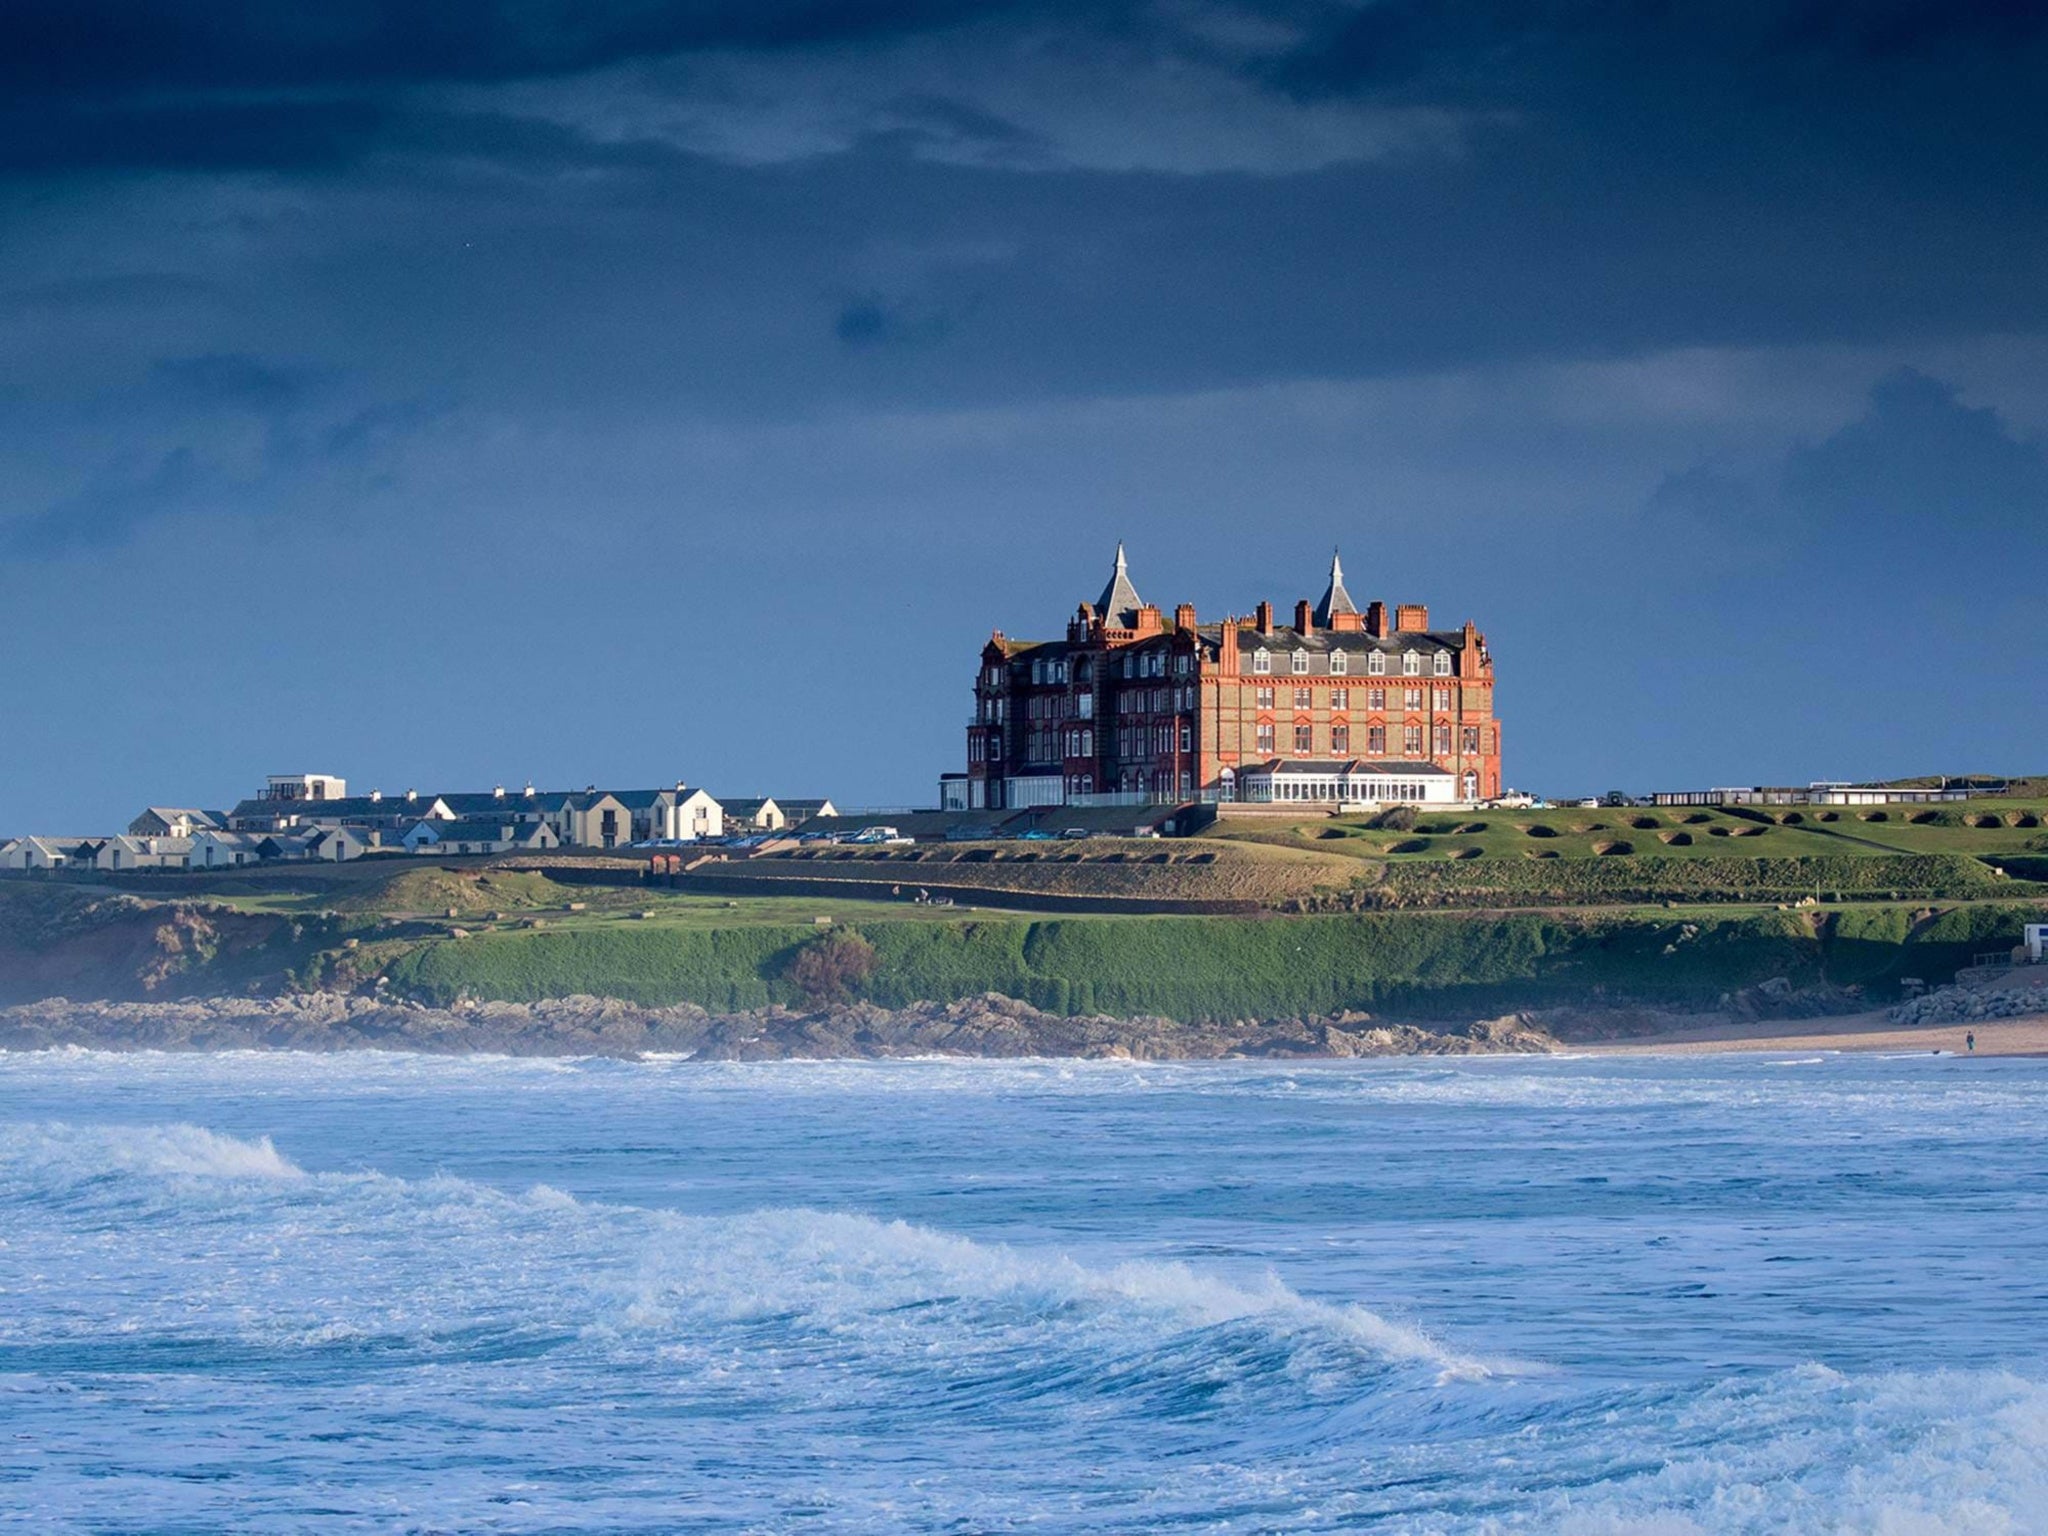 Watch surfers in action from the comfort of the Headland Hotel